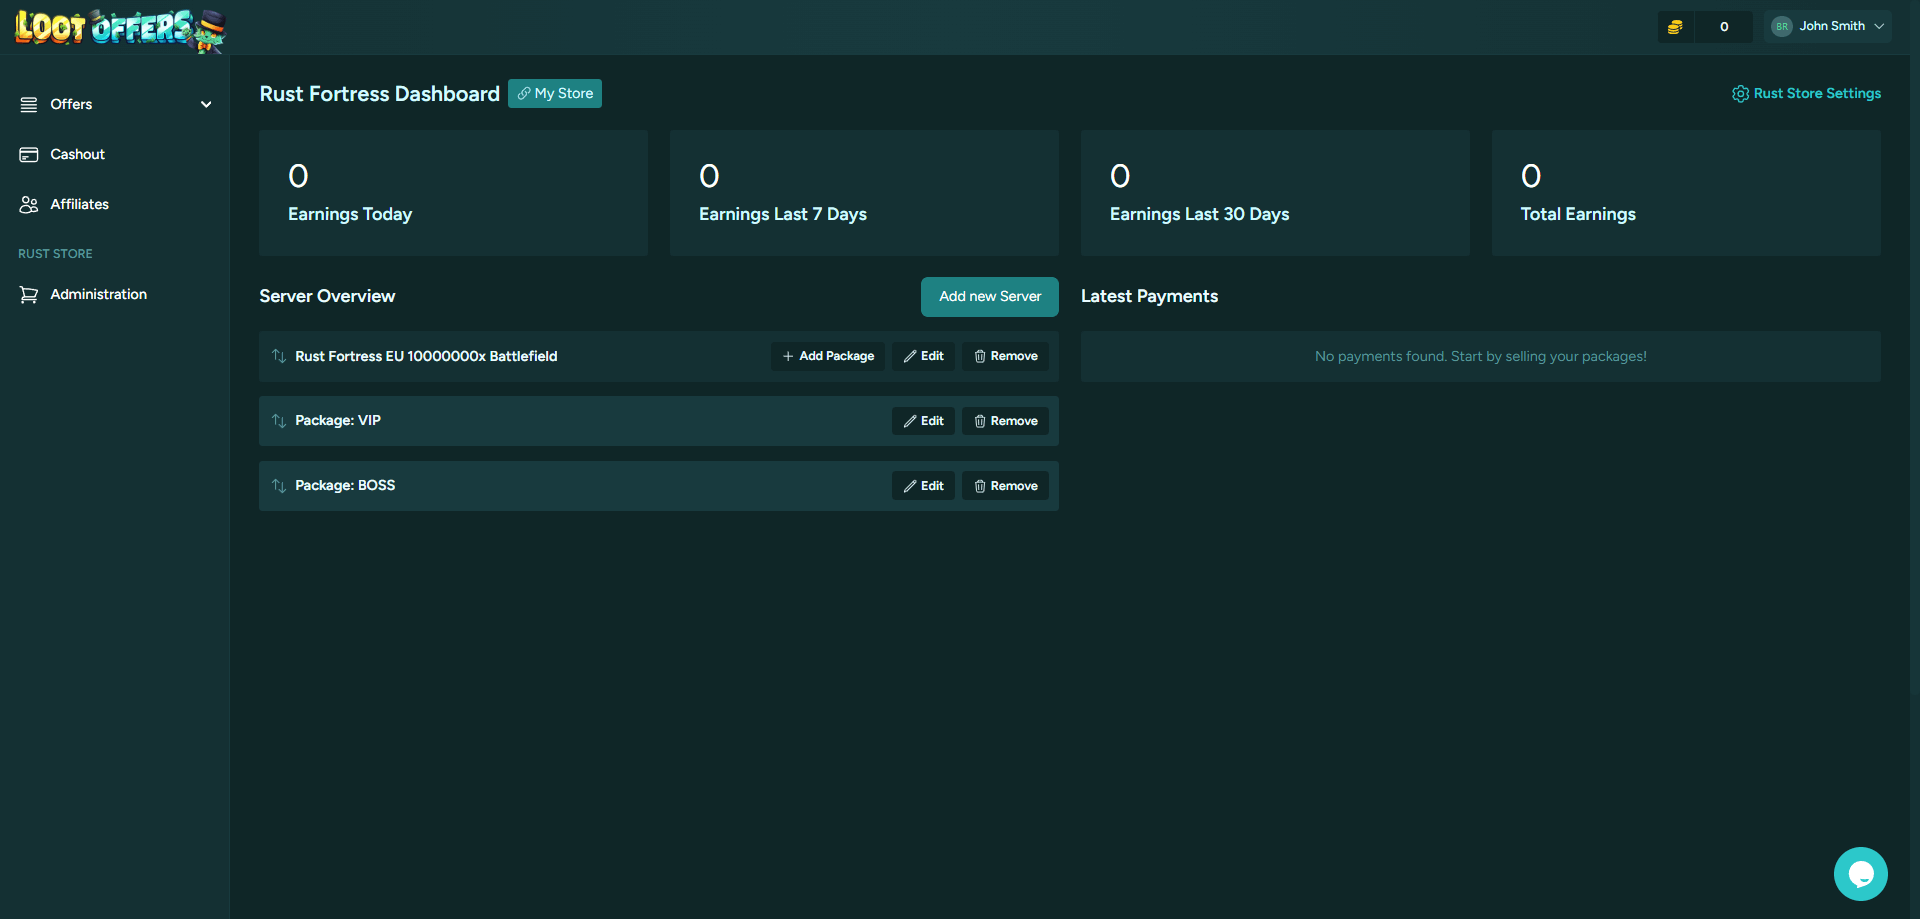 Rust store dashboard overview page for LootOffers.gg